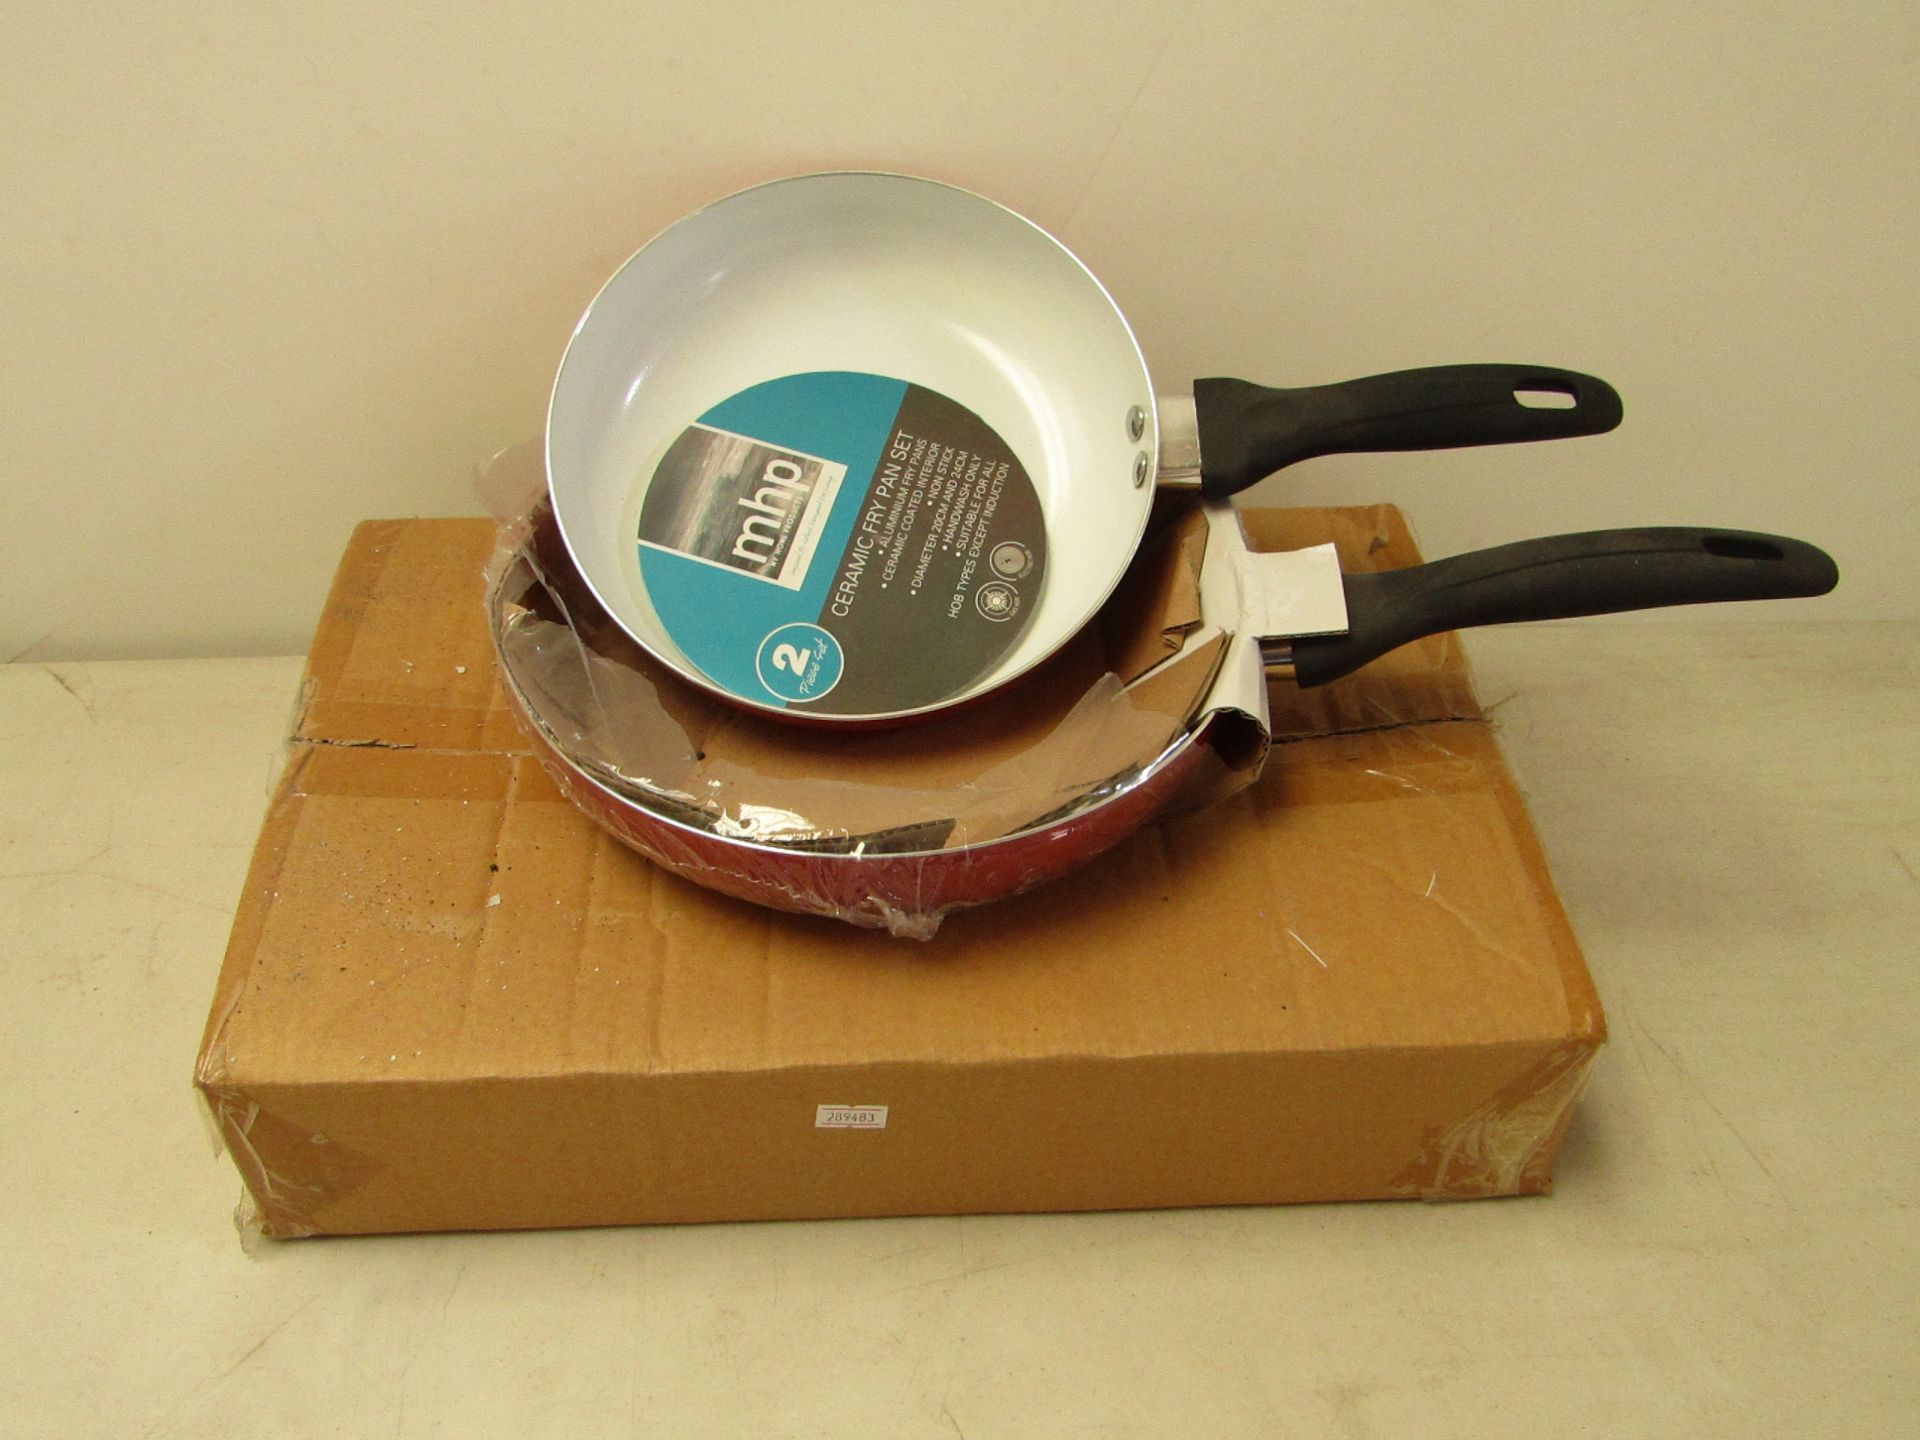 2 Piece mhp ceramic fry pan set, new and boxed.